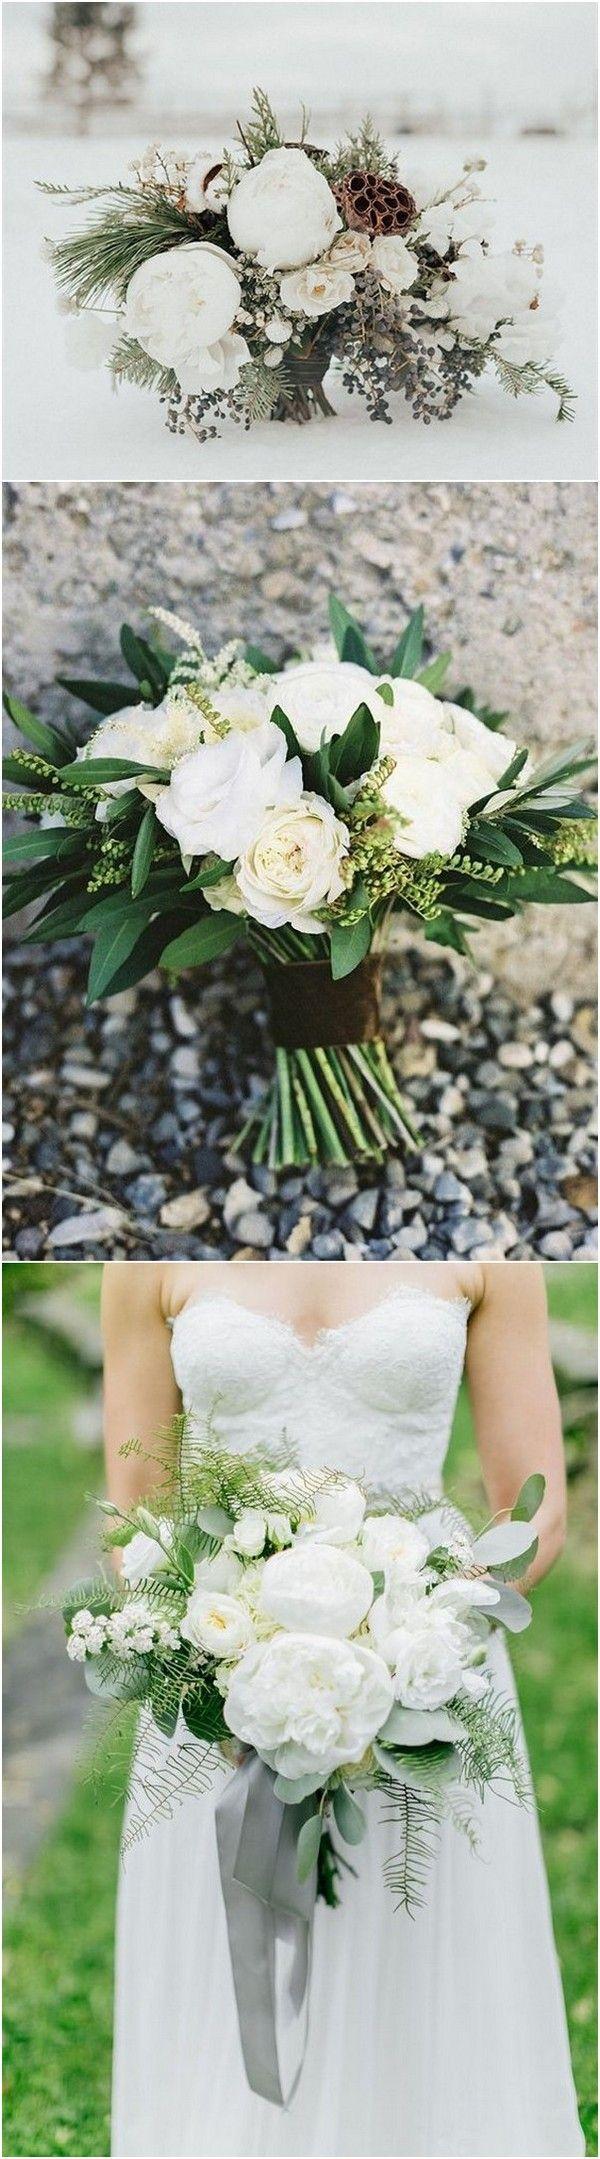 Hochzeit - 18 Charming Neutral Wedding Bouquets For 2018 Trends - Page 2 Of 2